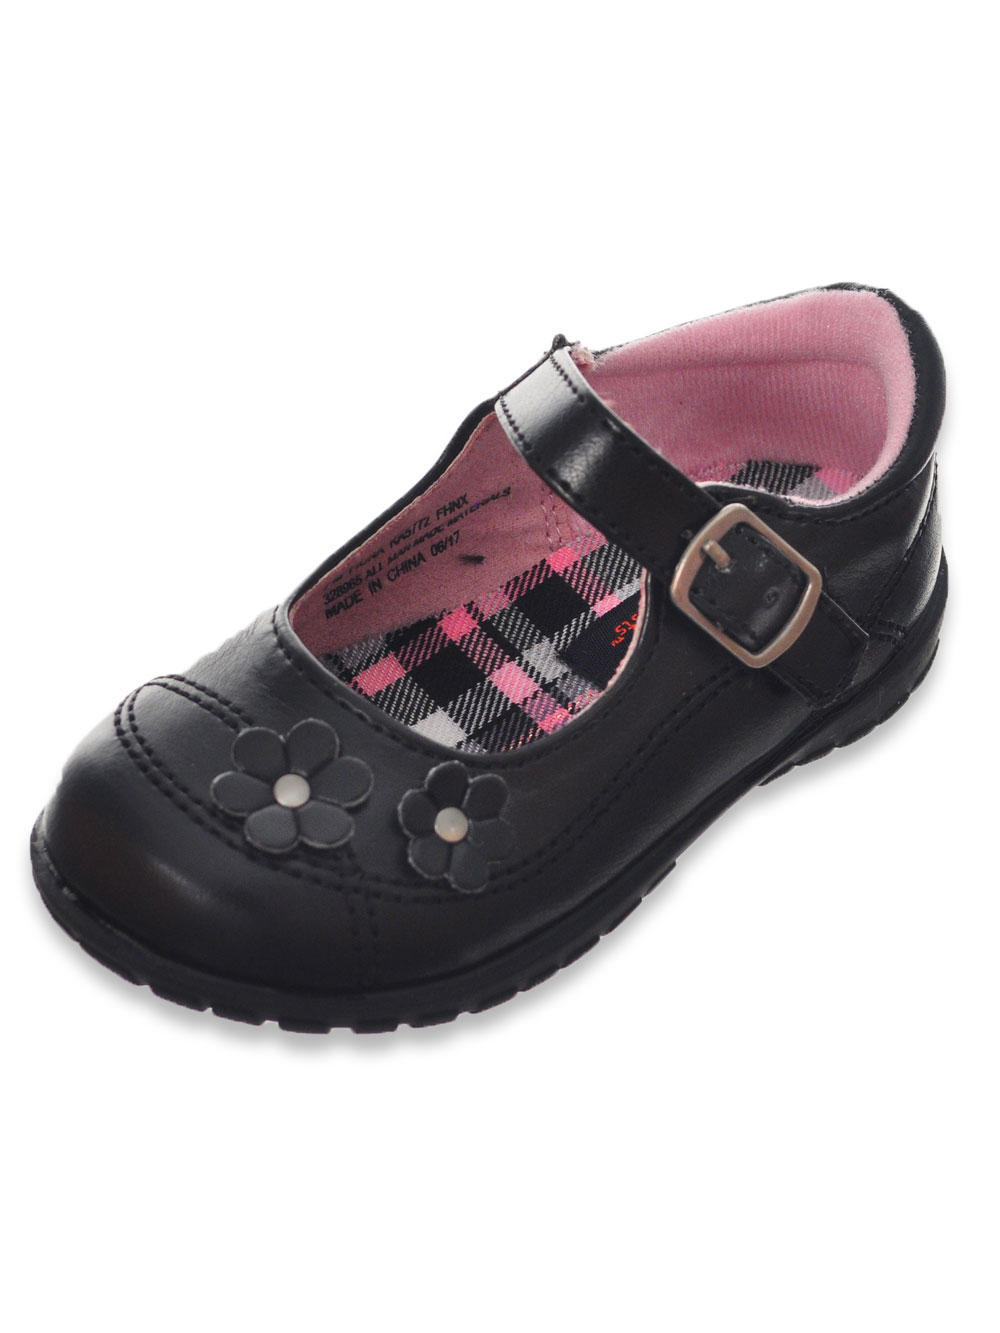 Girls' Mary Jane Shoes by French Toast 